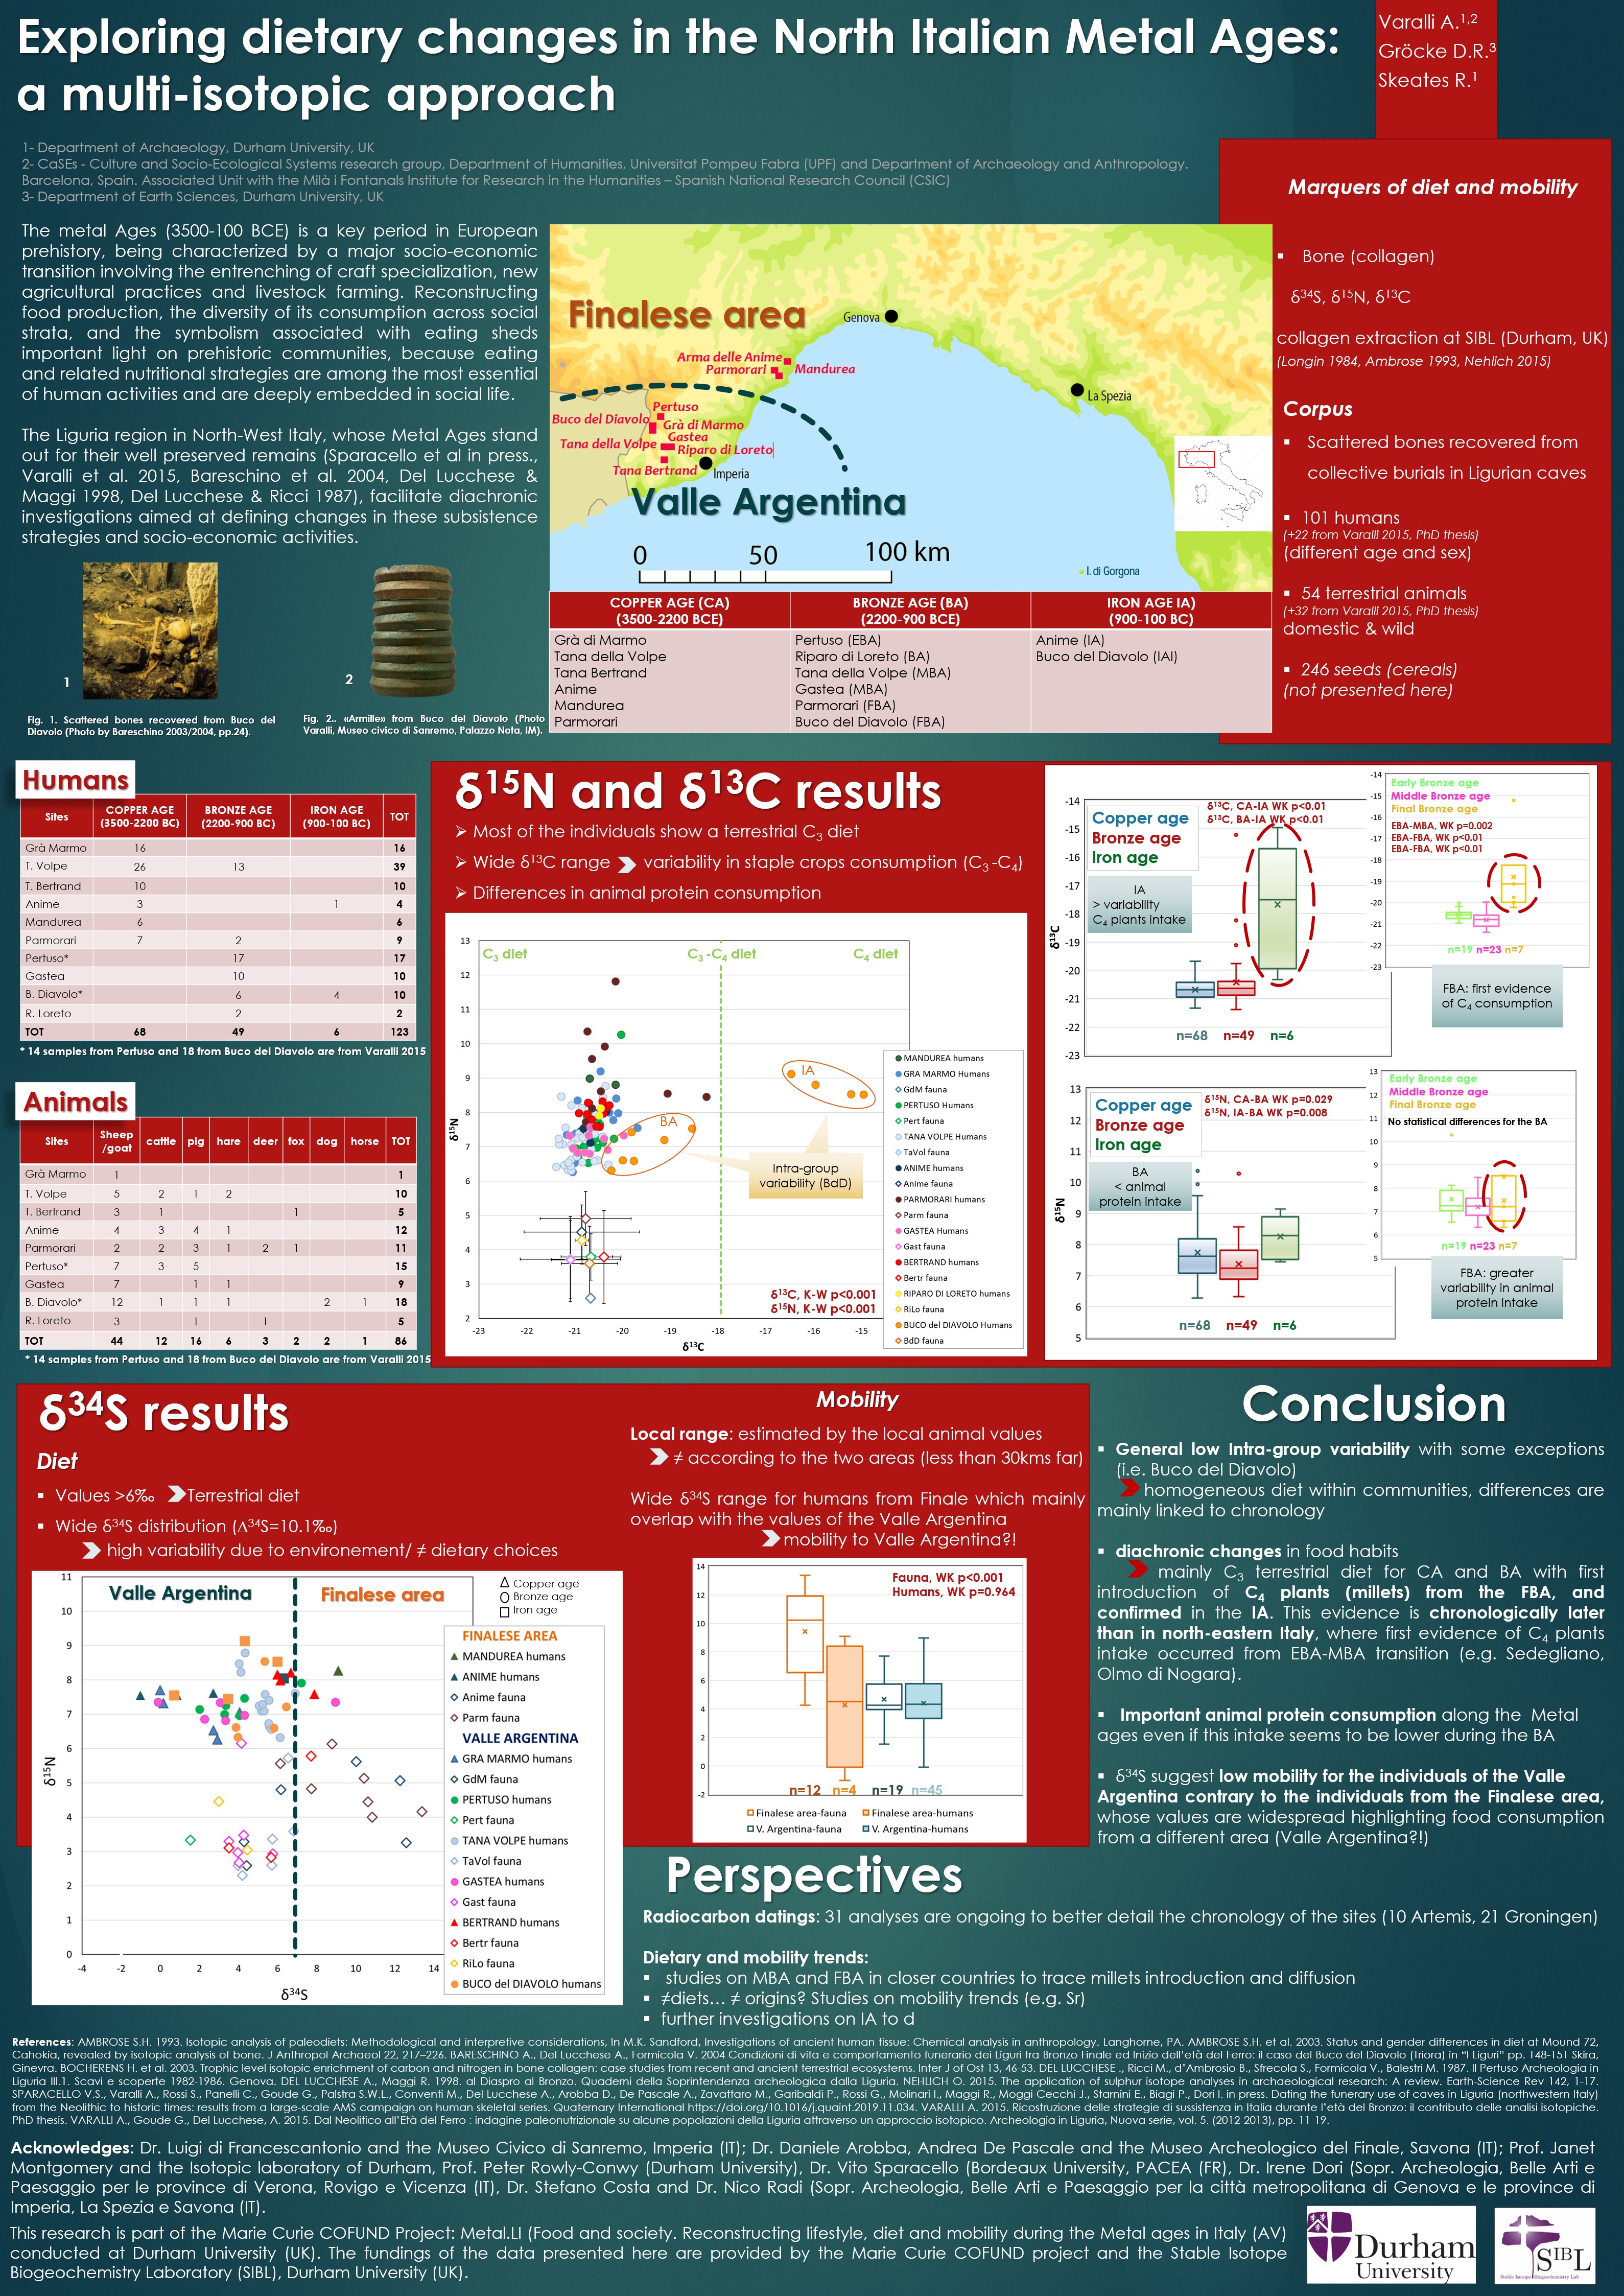 Poster titled - Exploring dietary changes in the North Italian Metal Ages: a multi-isotopic approach